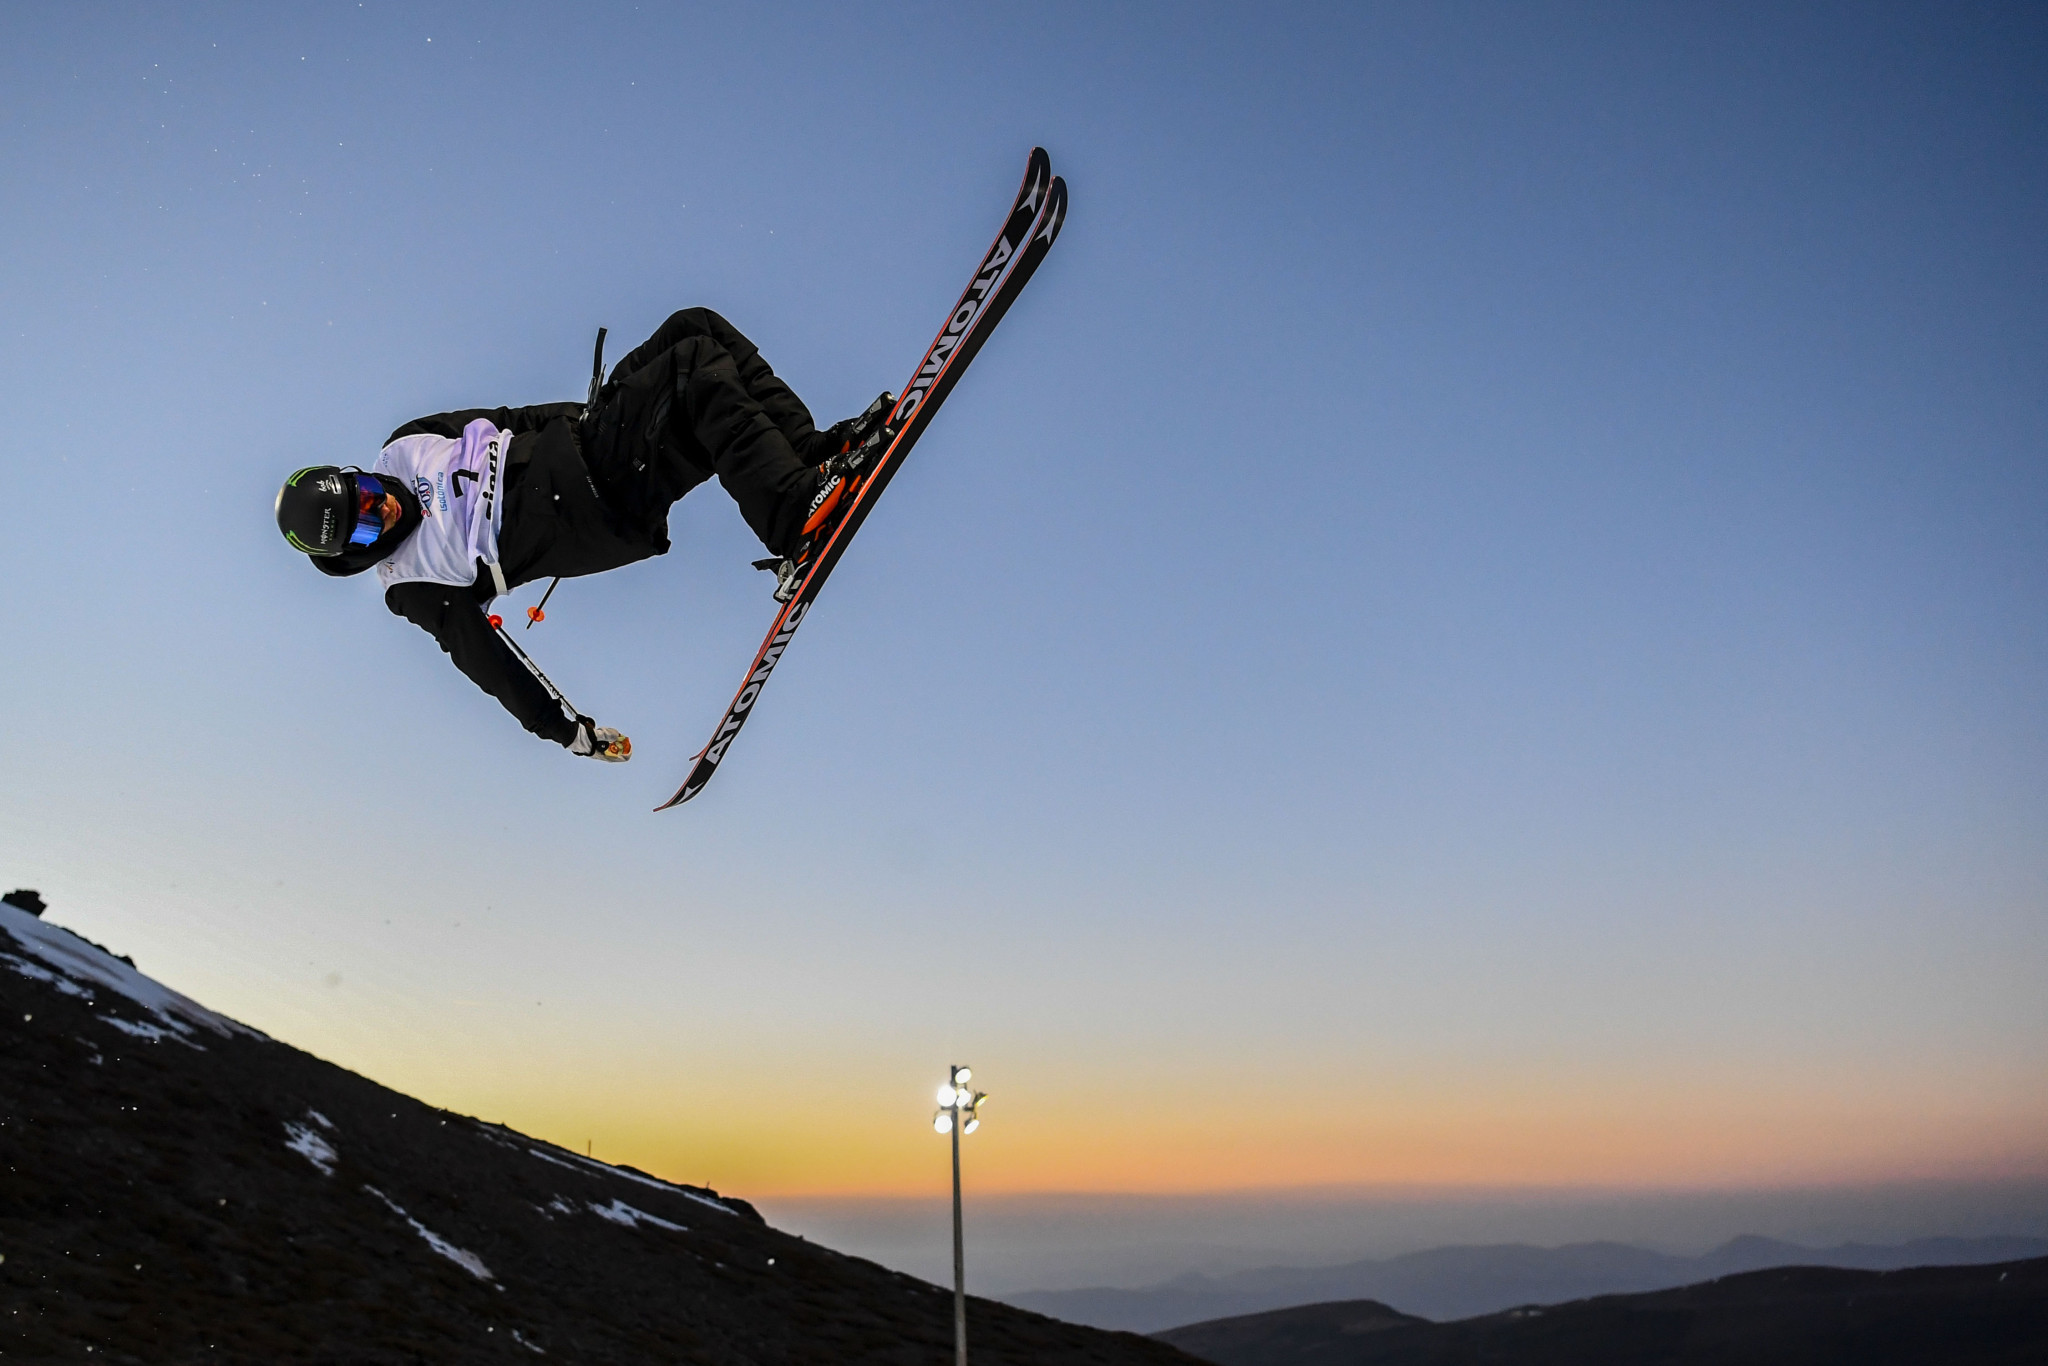 Gus Kenworthy claimed silver in the men's slopestyle event at Sochi 2014 ©Getty Images